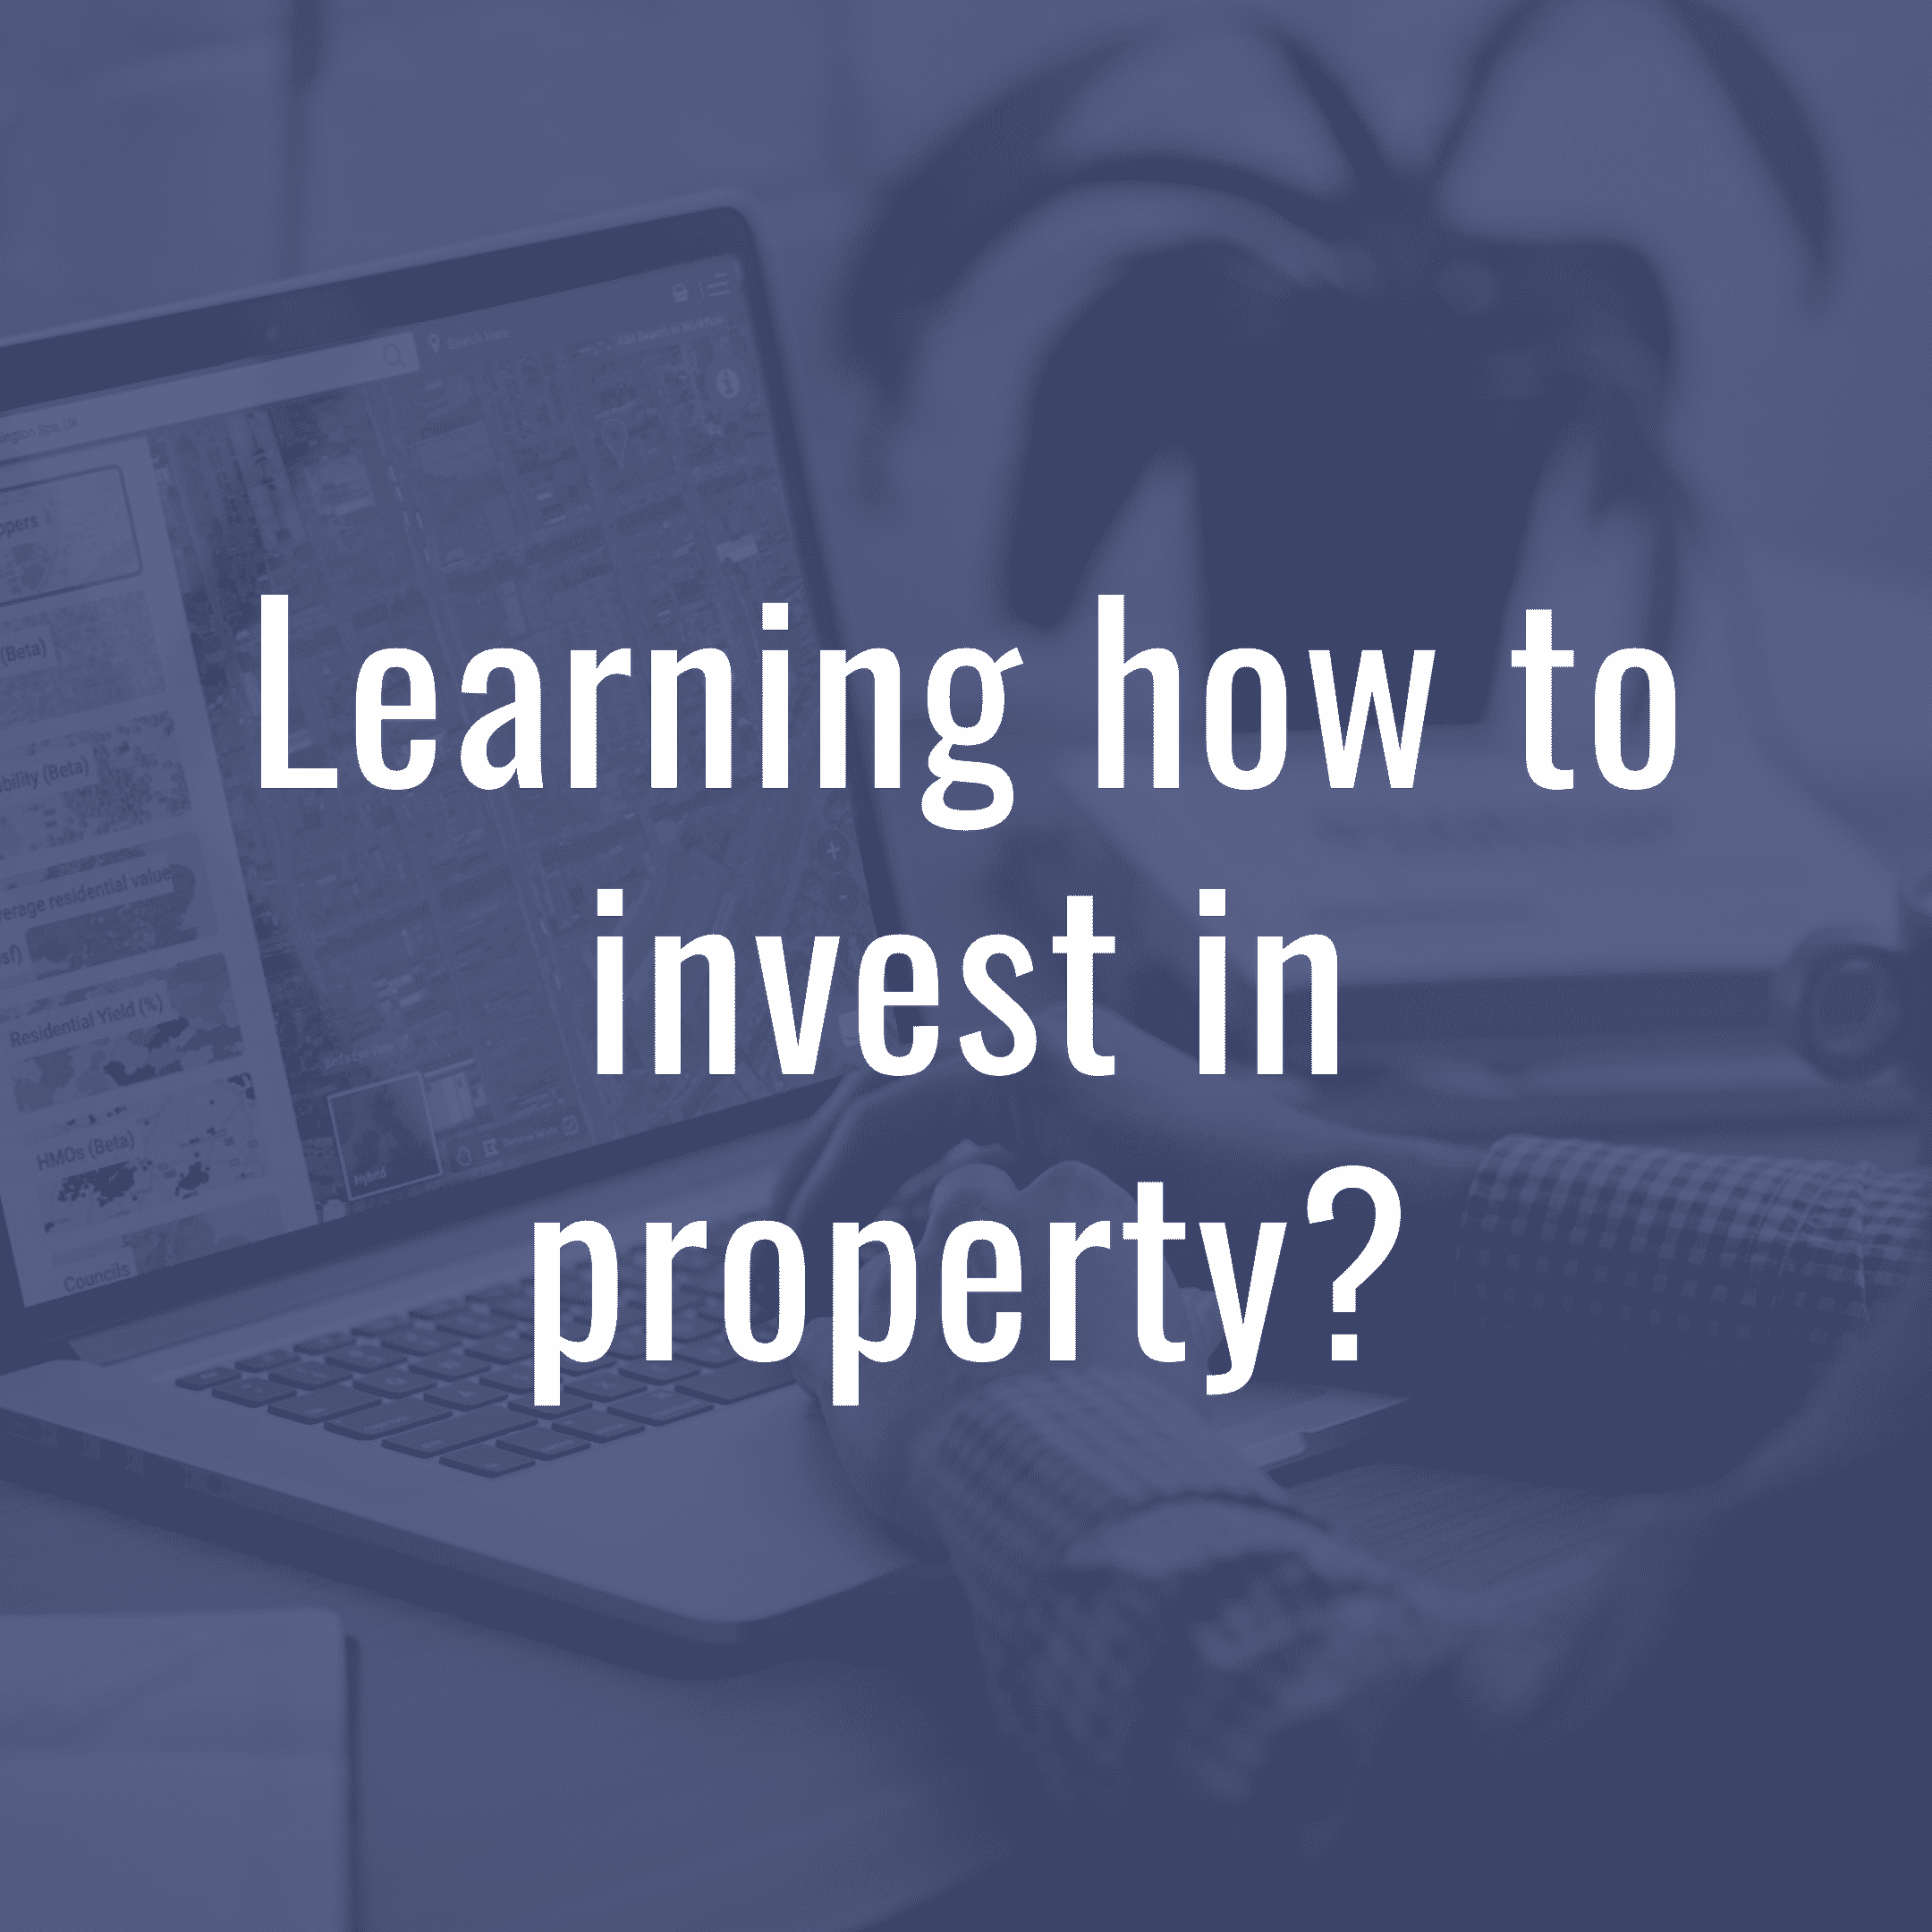 Learning how to invest in property?